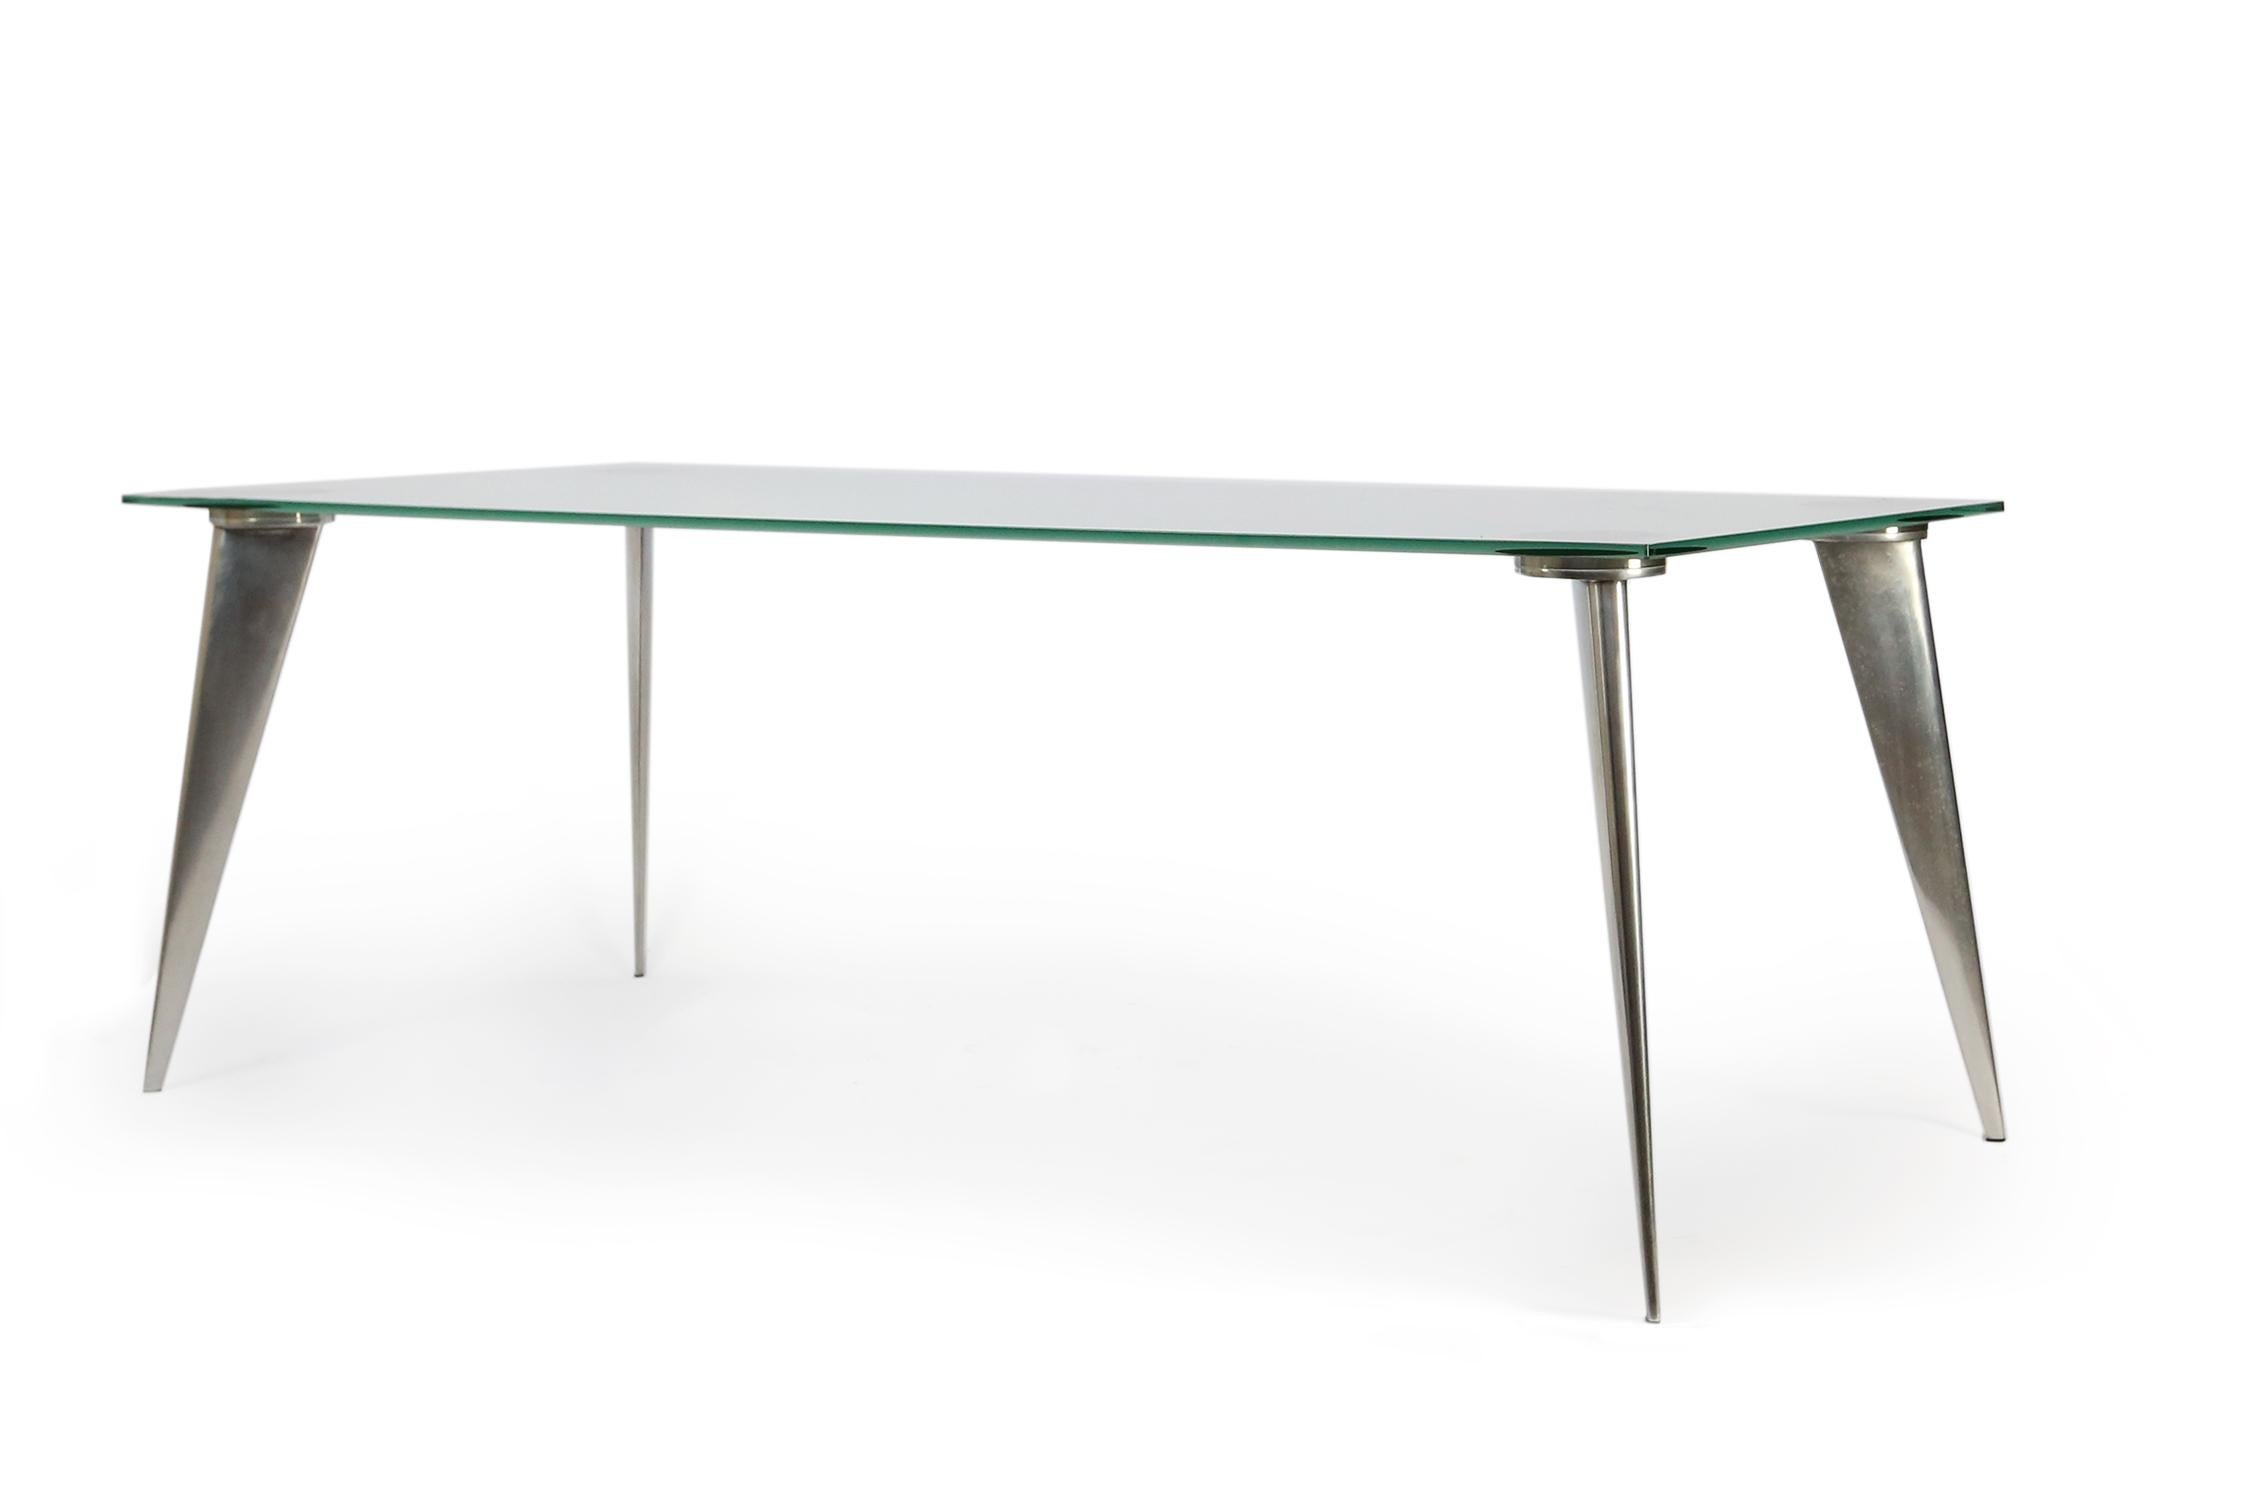 Vintage model M-dining table by Philippe Starck for Aleph
Rectangular glass table model resting on four chromed aluminum profiled legs. The glass is in absolute great condition no chips or scratches on the glass.

 